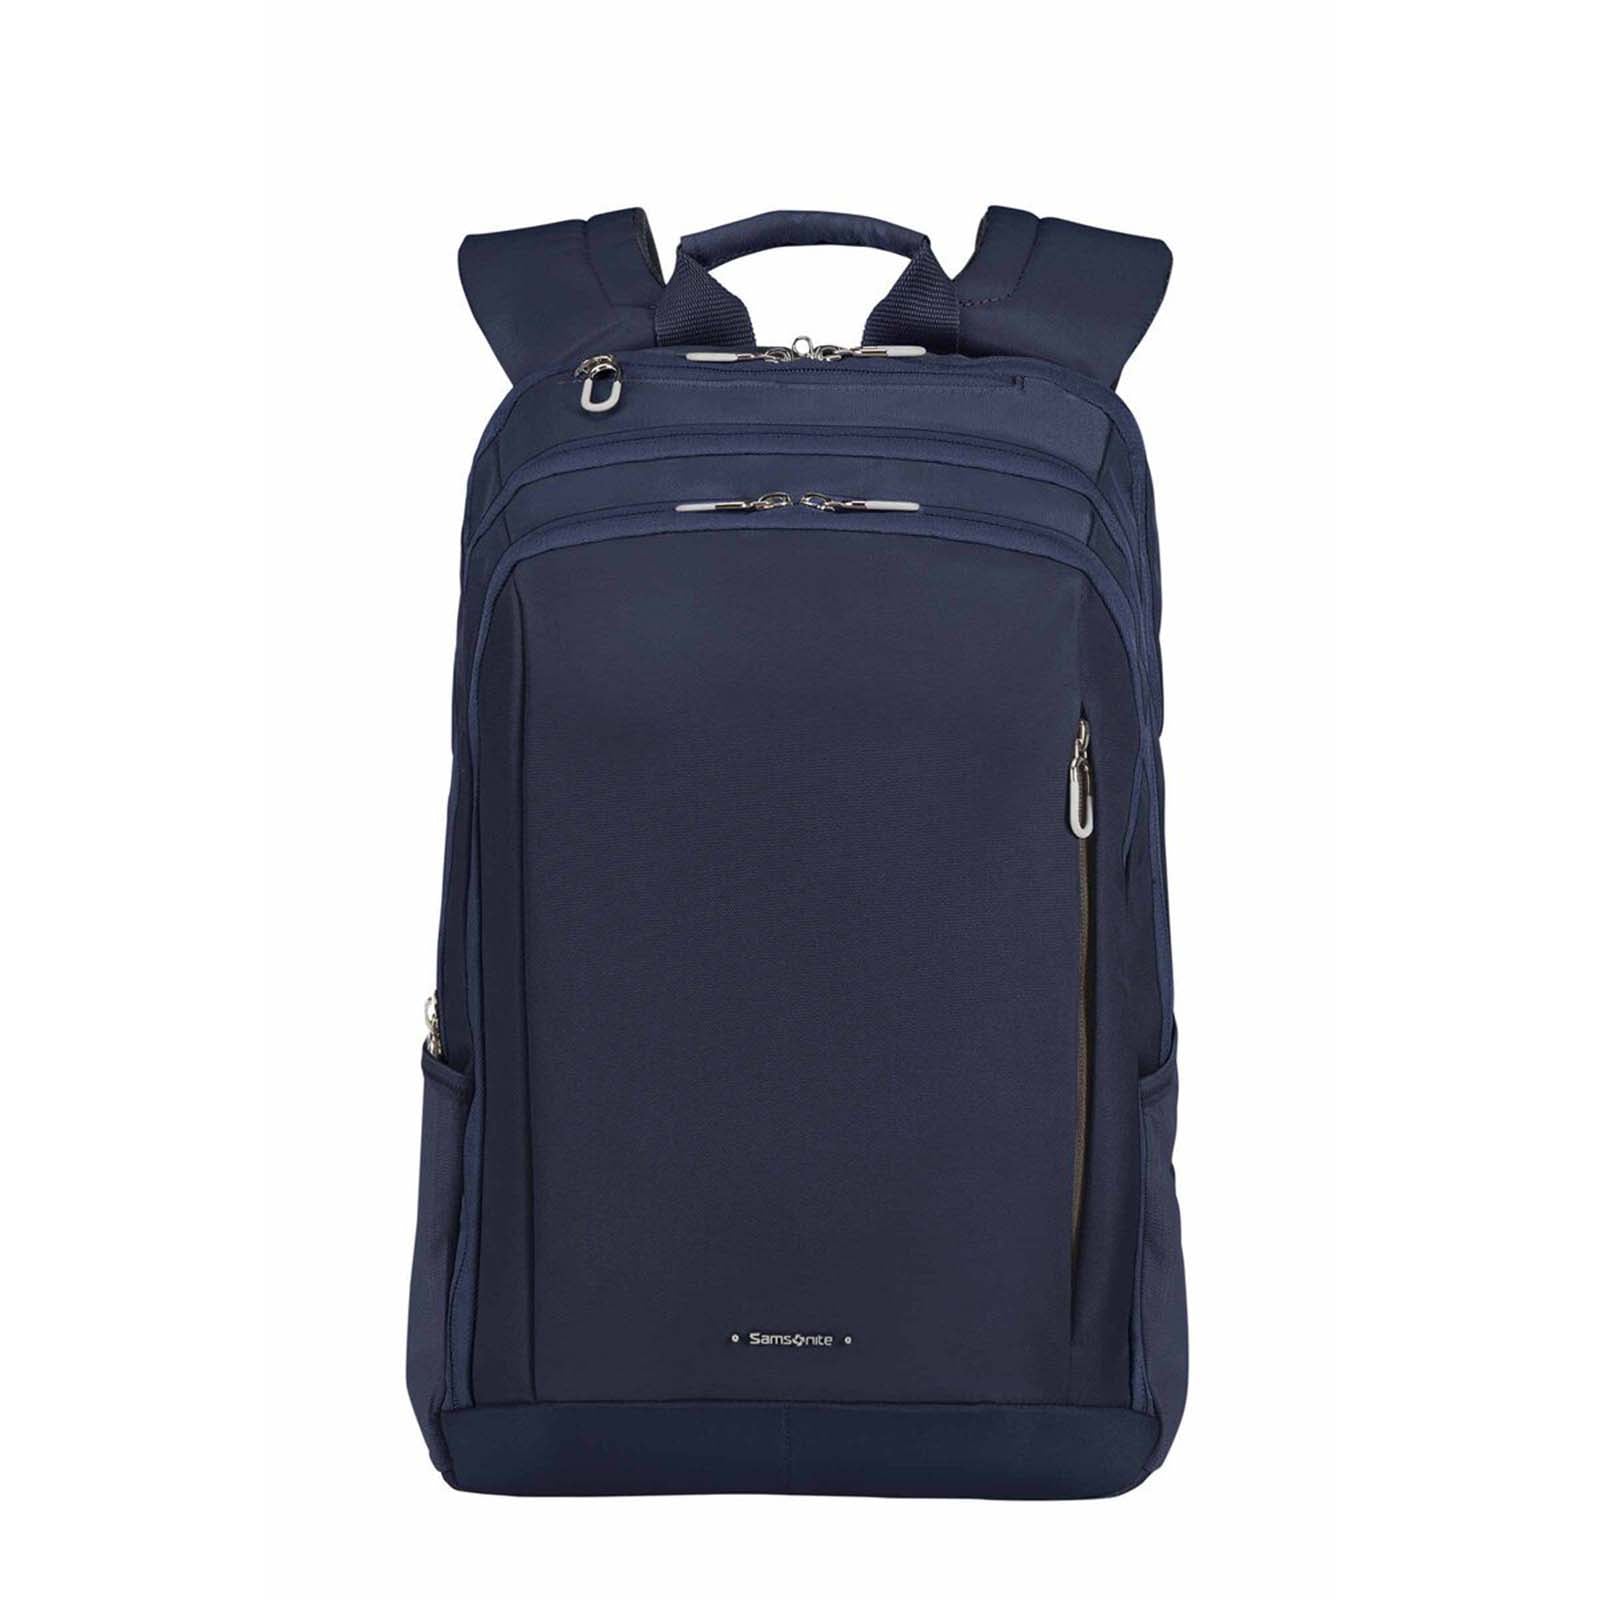 Samsonite-Guardit-Classy-15-Inch-Laptop-Backpack-Midnight-Blue-Front